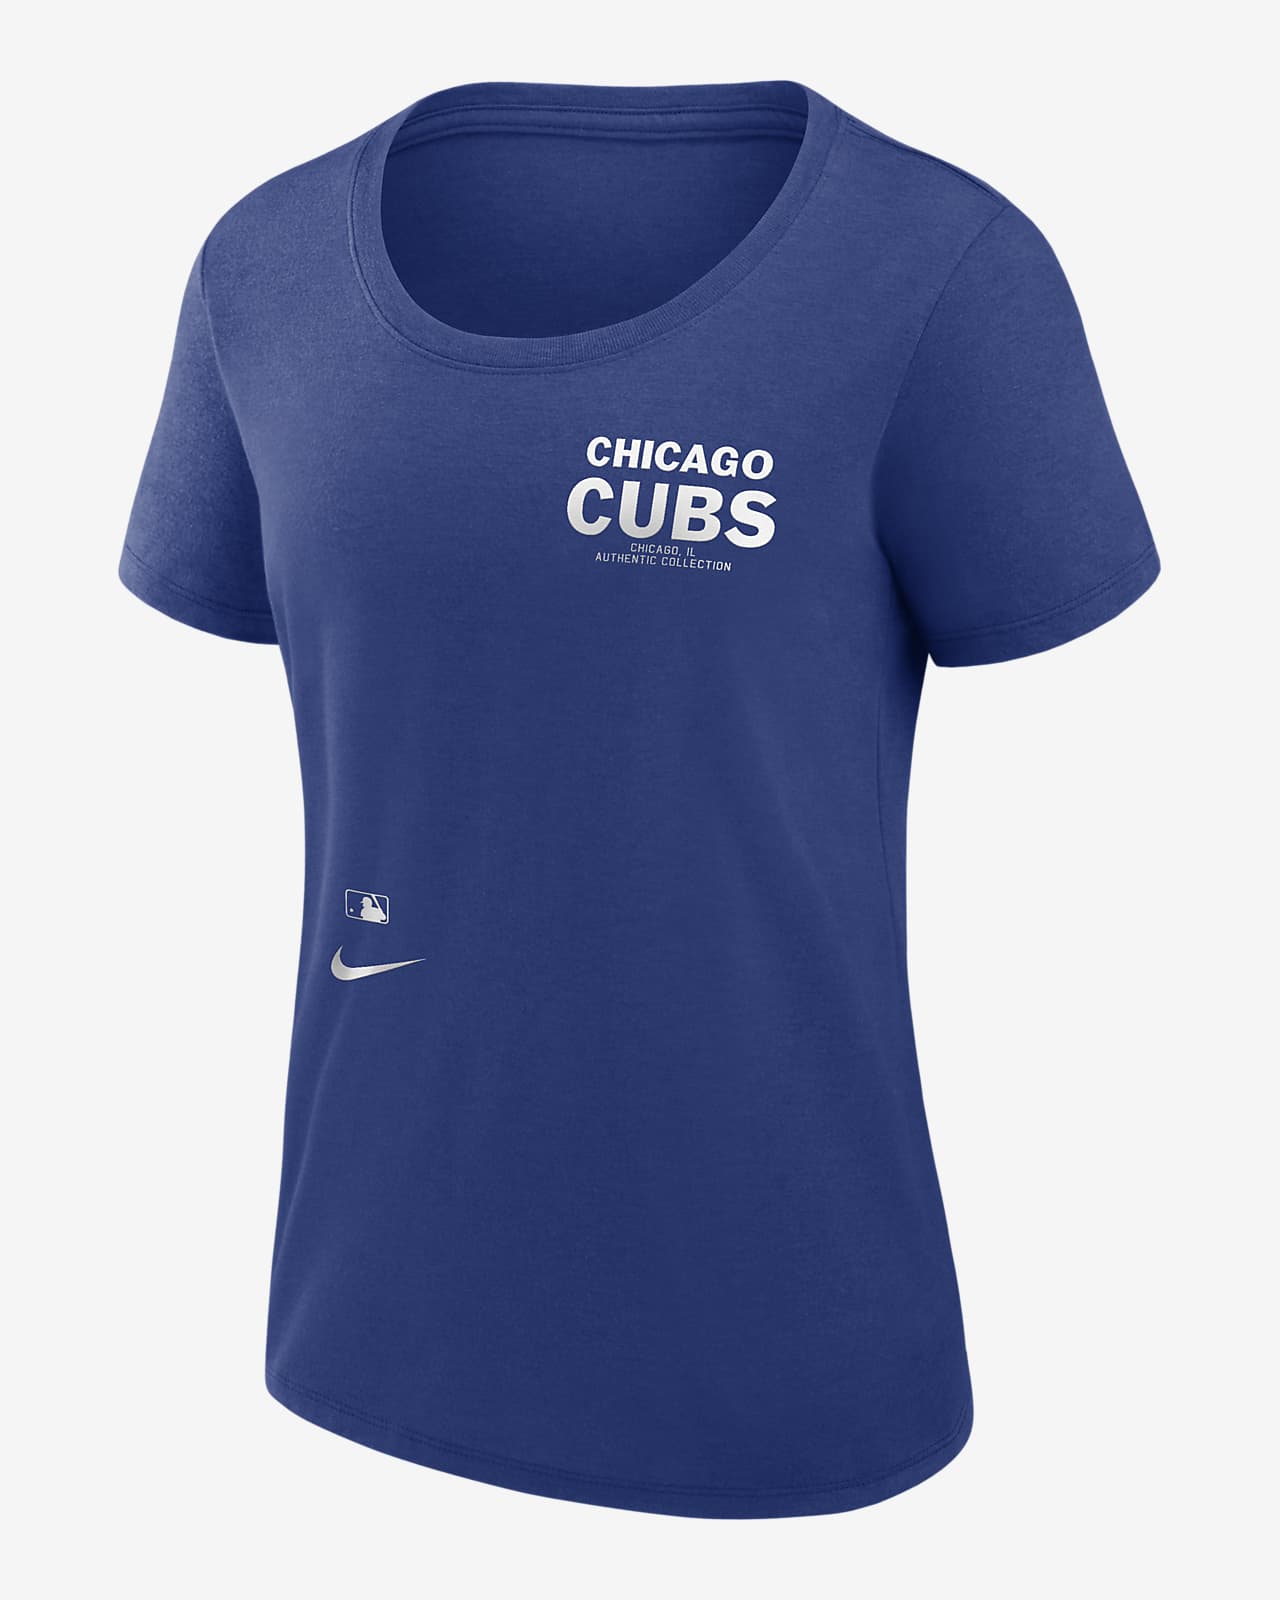 Chicago Cubs Authentic Collection Early Work Women's Nike Dri-FIT MLB T-Shirt